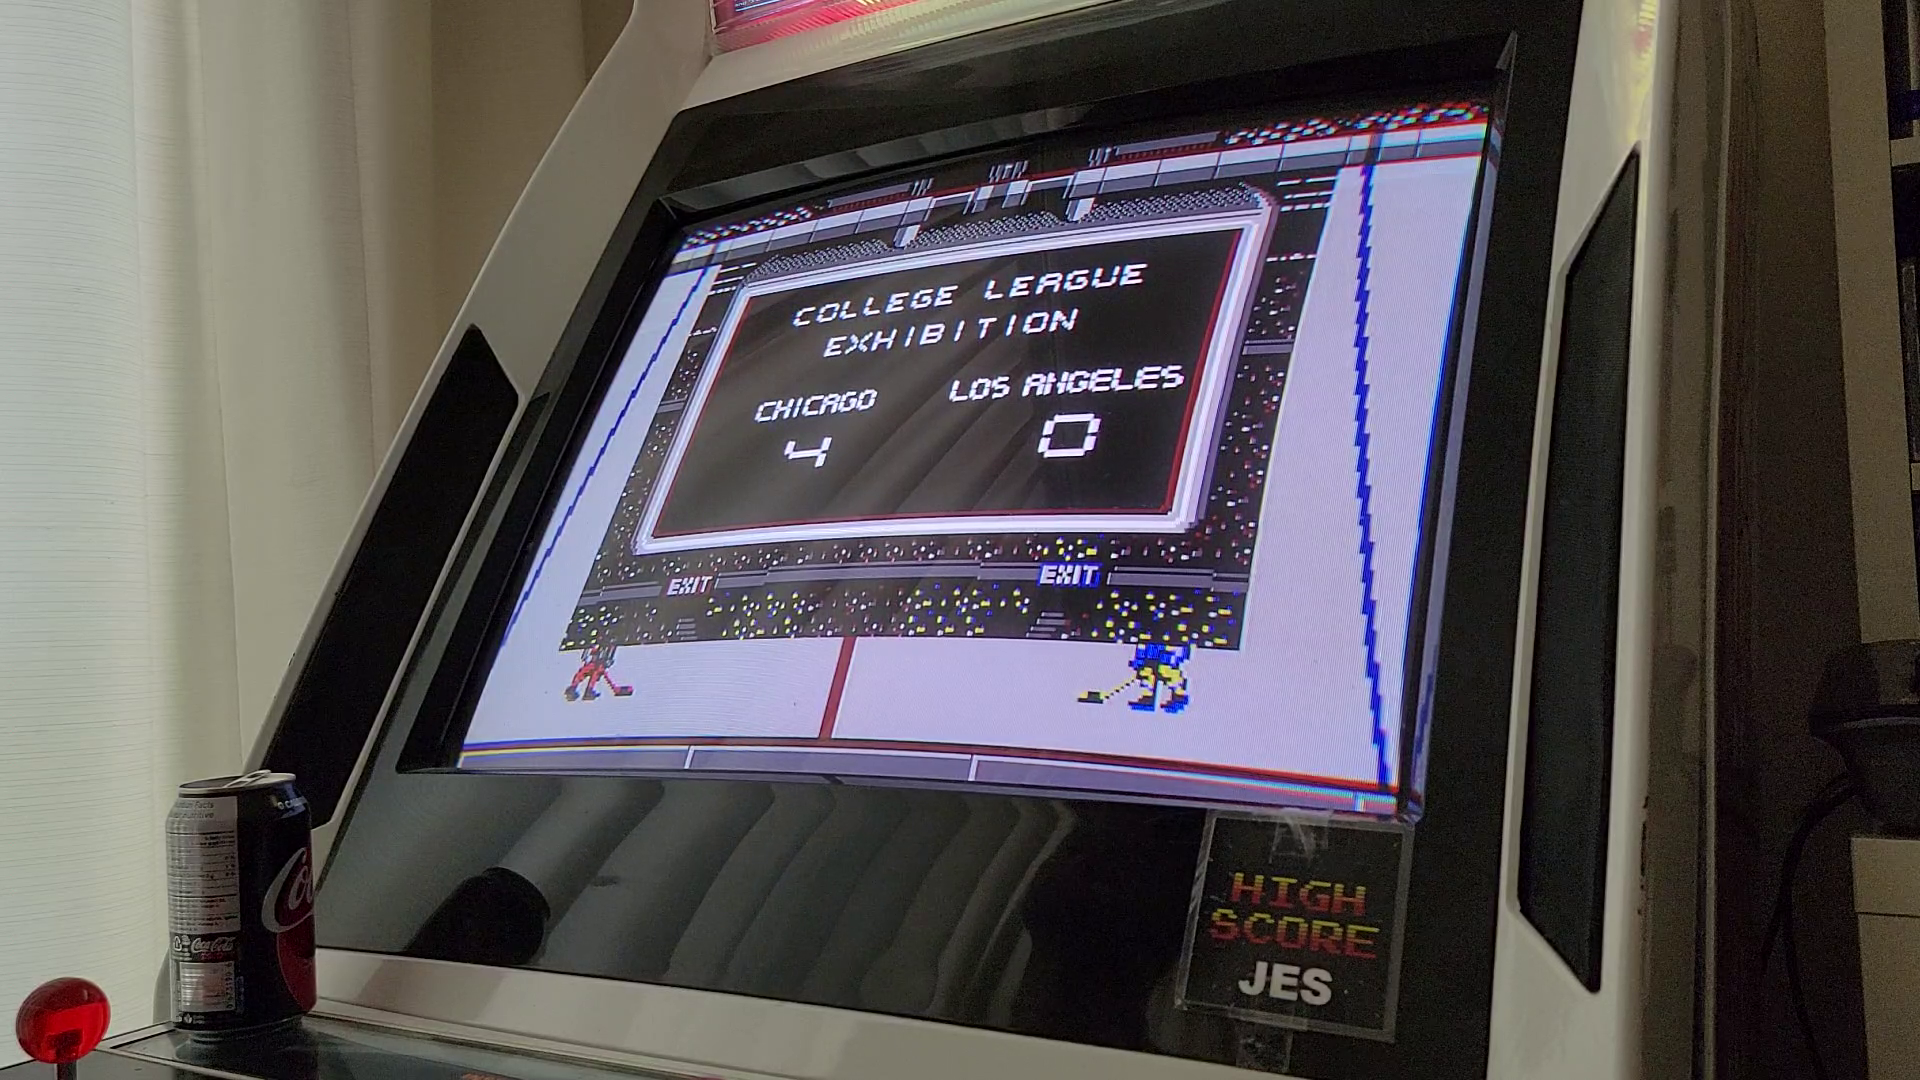 JES: Blades Of Steel [College, Most Goals] (NES/Famicom Emulated) 4 points on 2021-05-22 18:56:01